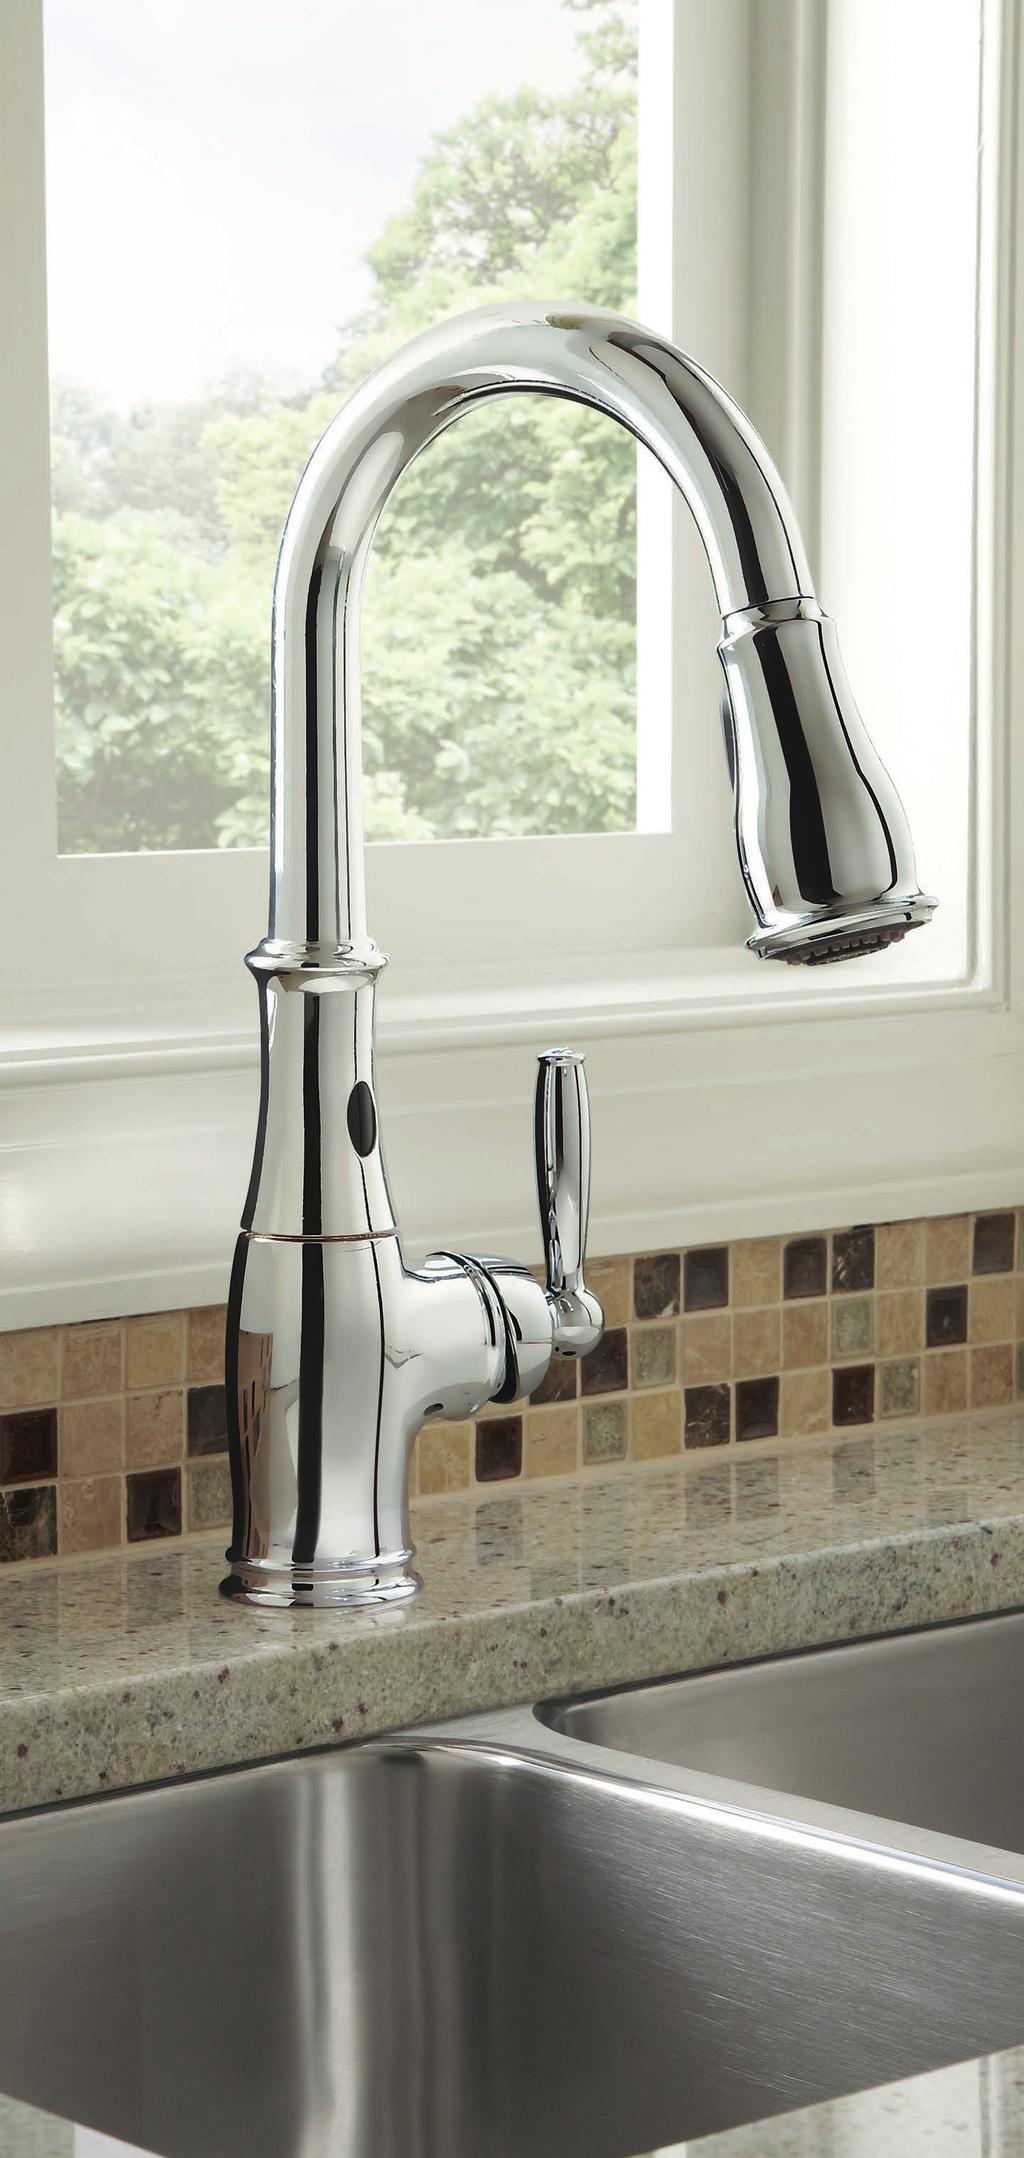 3 The Handle works as expected and adjusts the temperature and flow of water. High-moisture areas, such as kitchens and bathrooms, are hot spots for the growth of microbes.